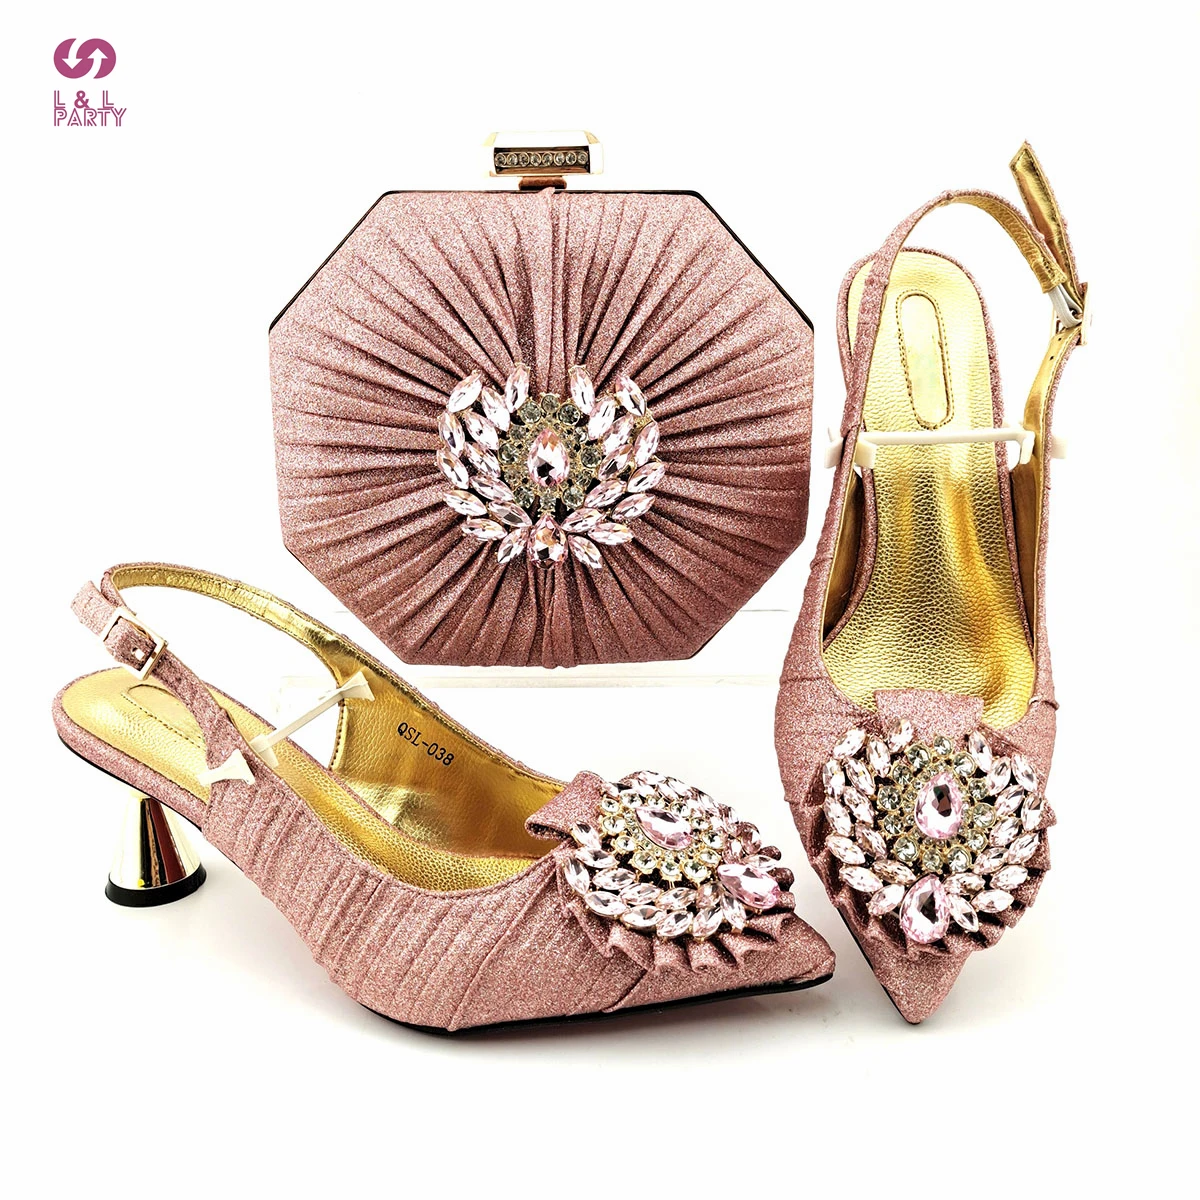 

Pointed Tole New Arrivals Italian Women Shoes and Bag Set in Pink Color Classics Slingbacks Pumps for Wedding Party